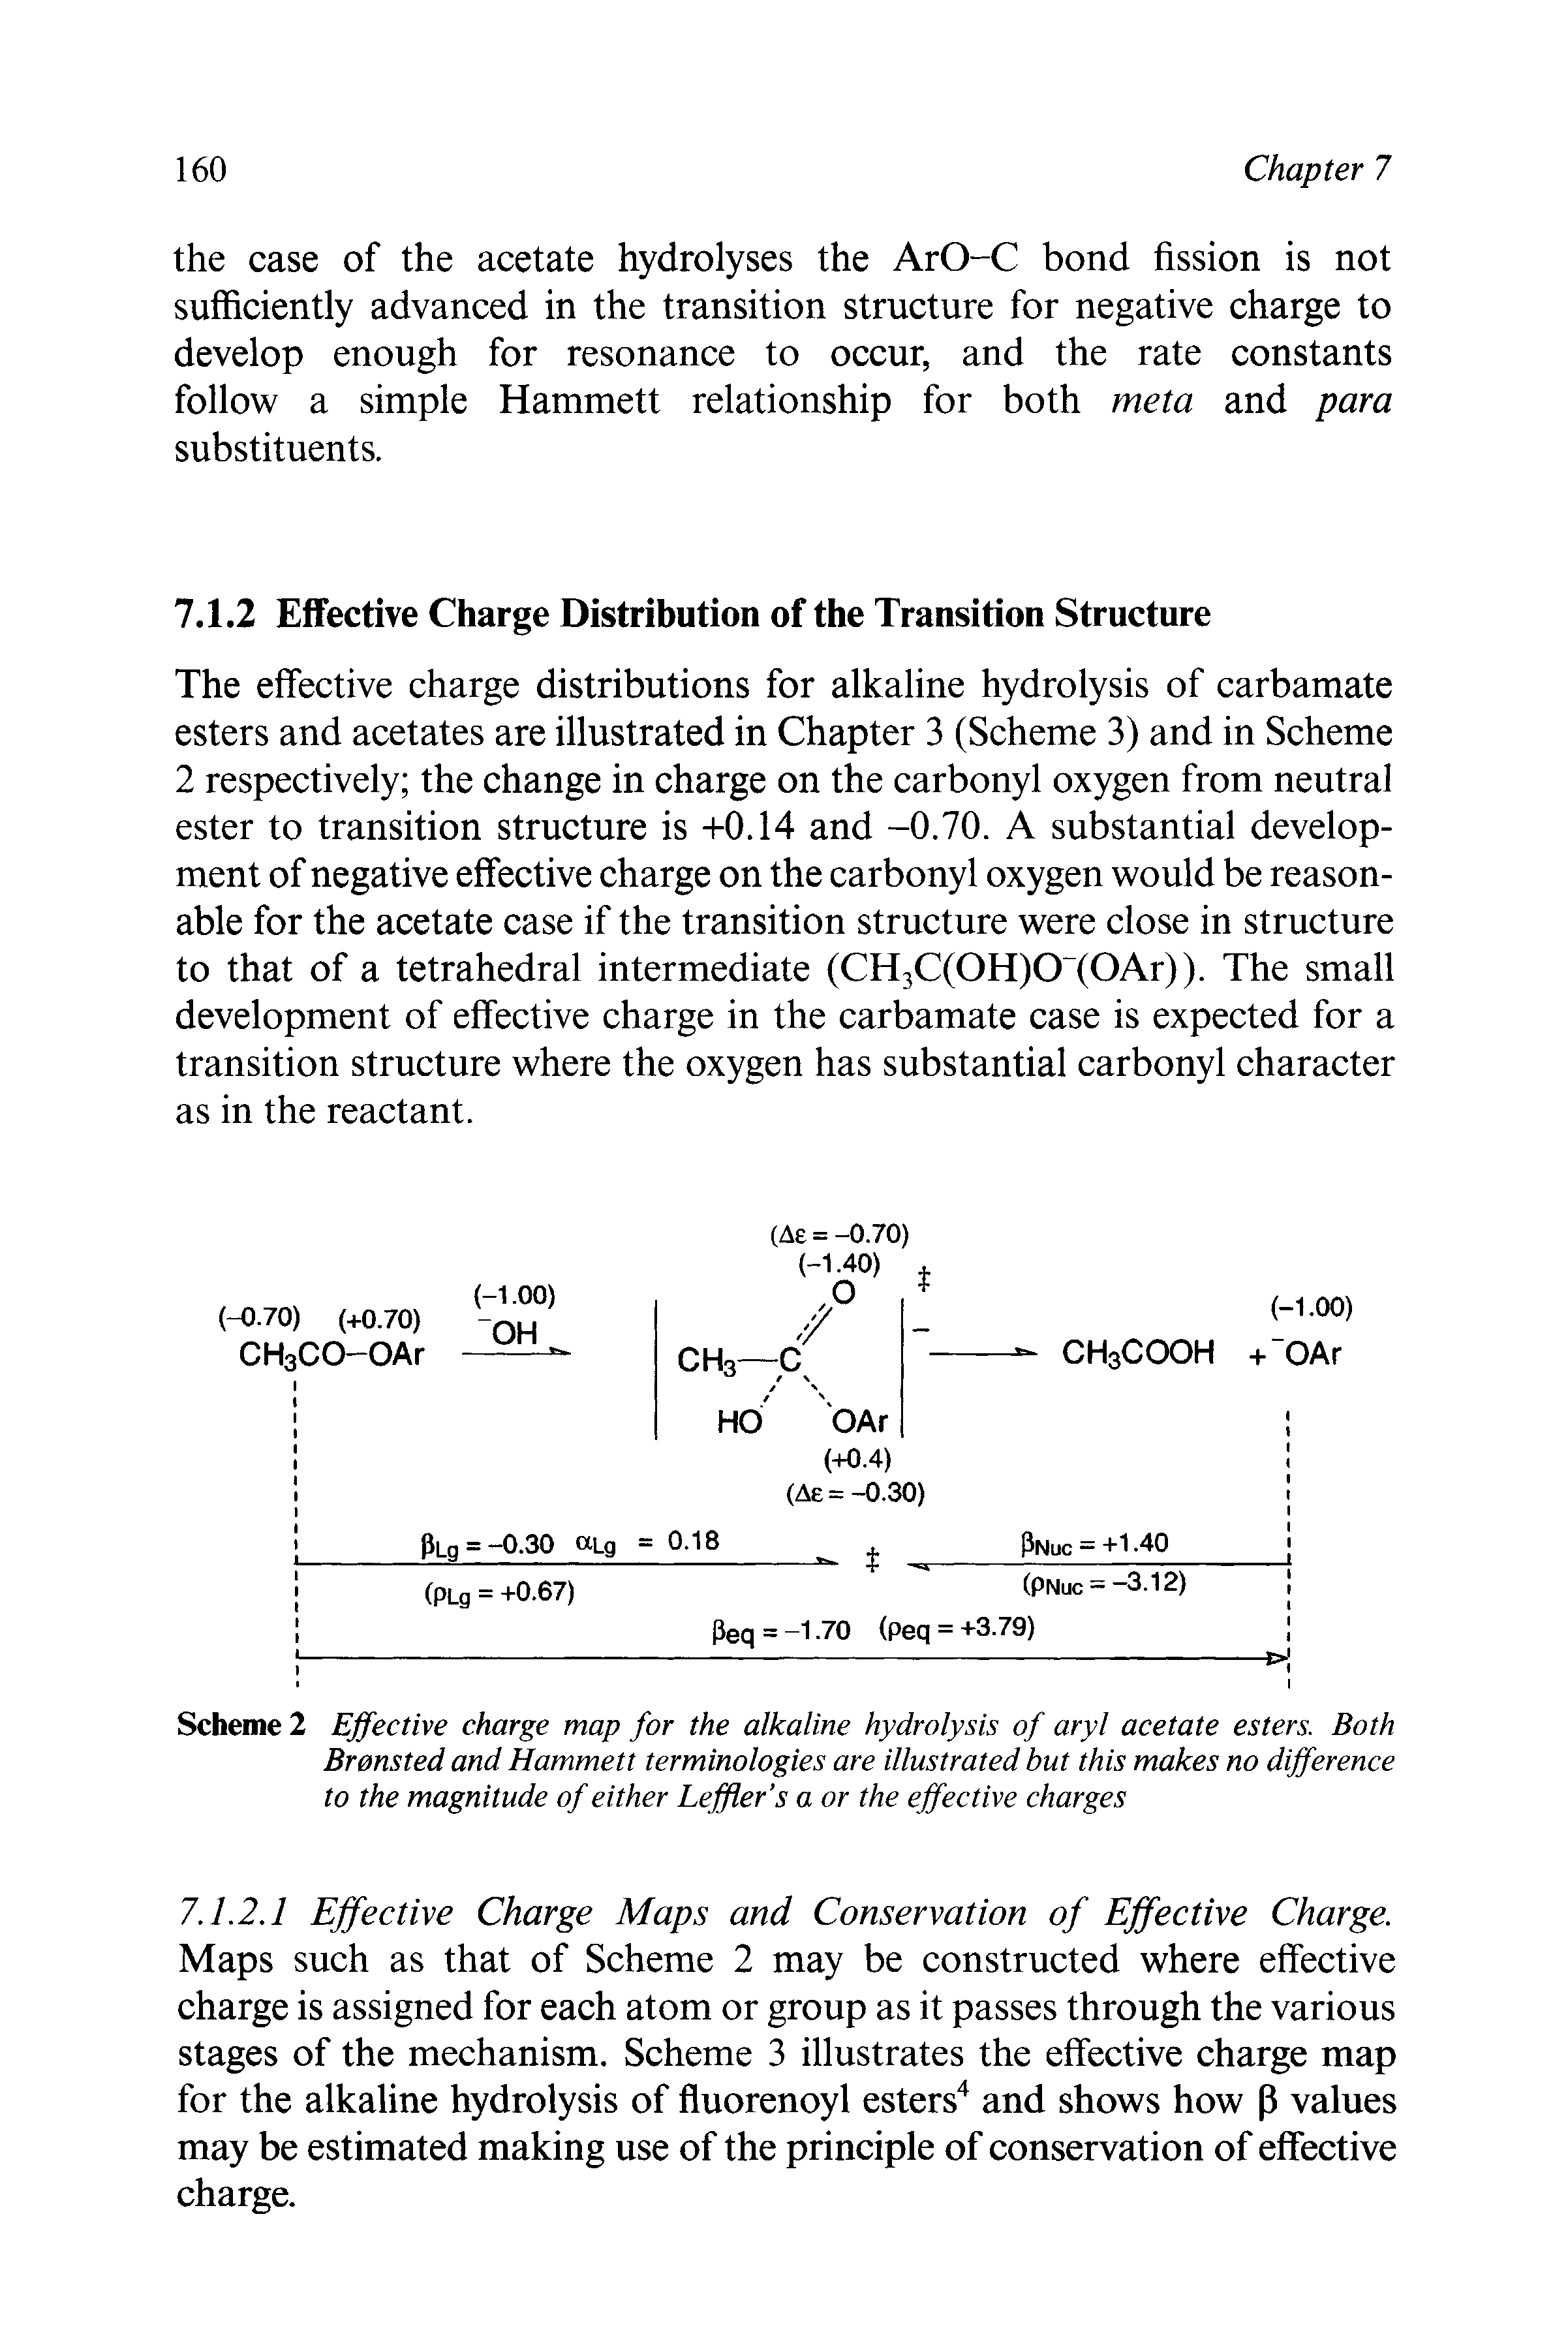 Scheme Effective charge map for the alkaline hydrolysis of aryl acetate esters. Both Bronsted and Hammett terminologies are illustrated but this makes no difference to the magnitude of either Leffler s a or the effective charges...